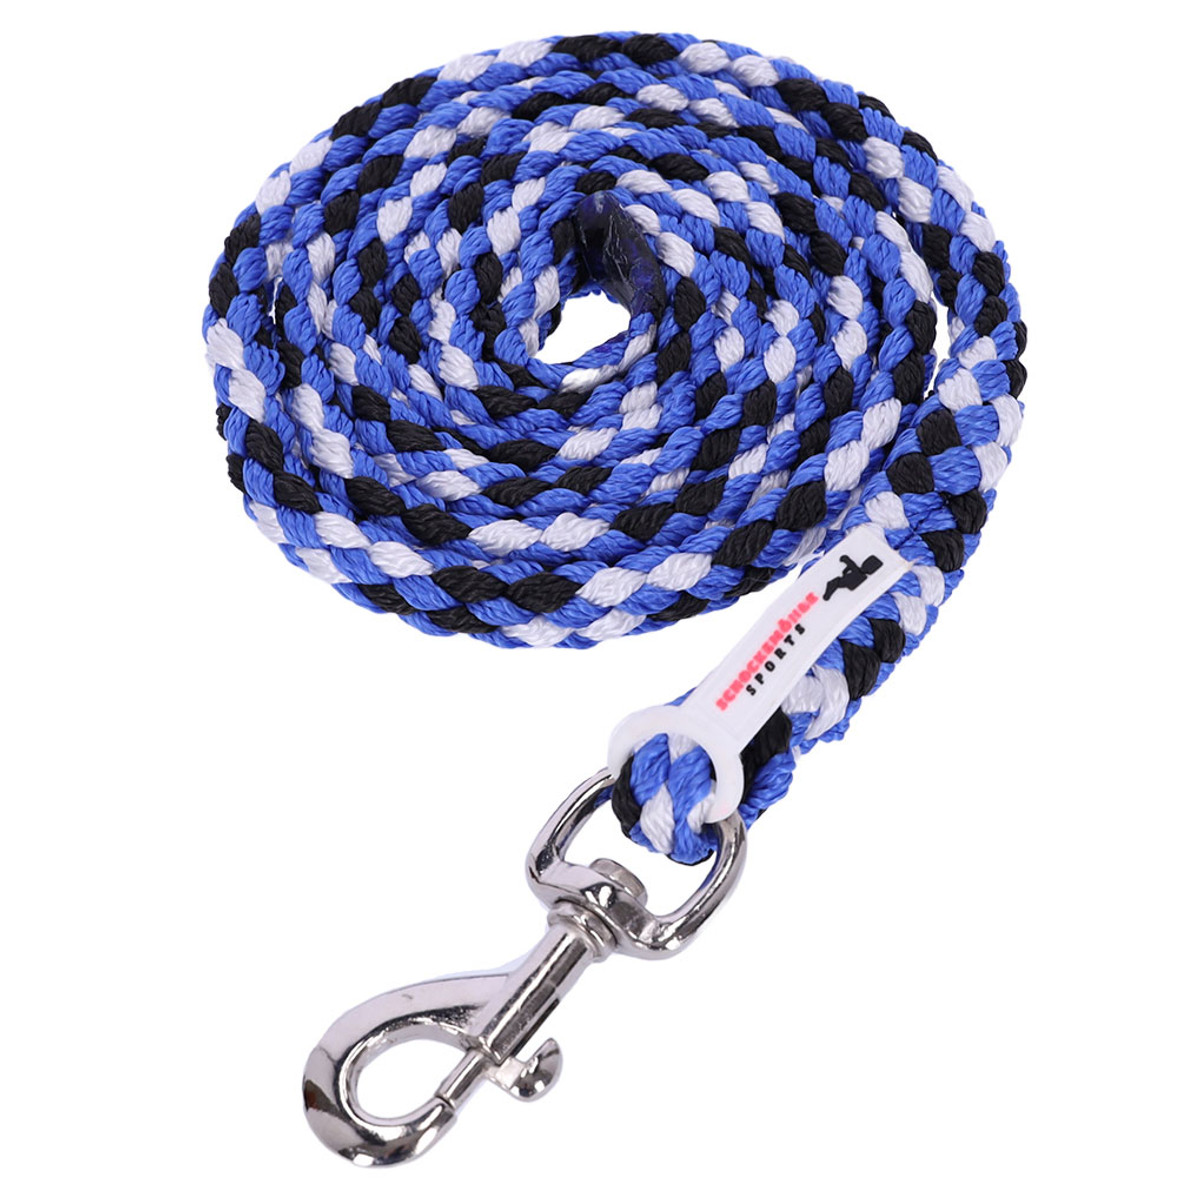 Schockemohle Sports Catch Lead Rope